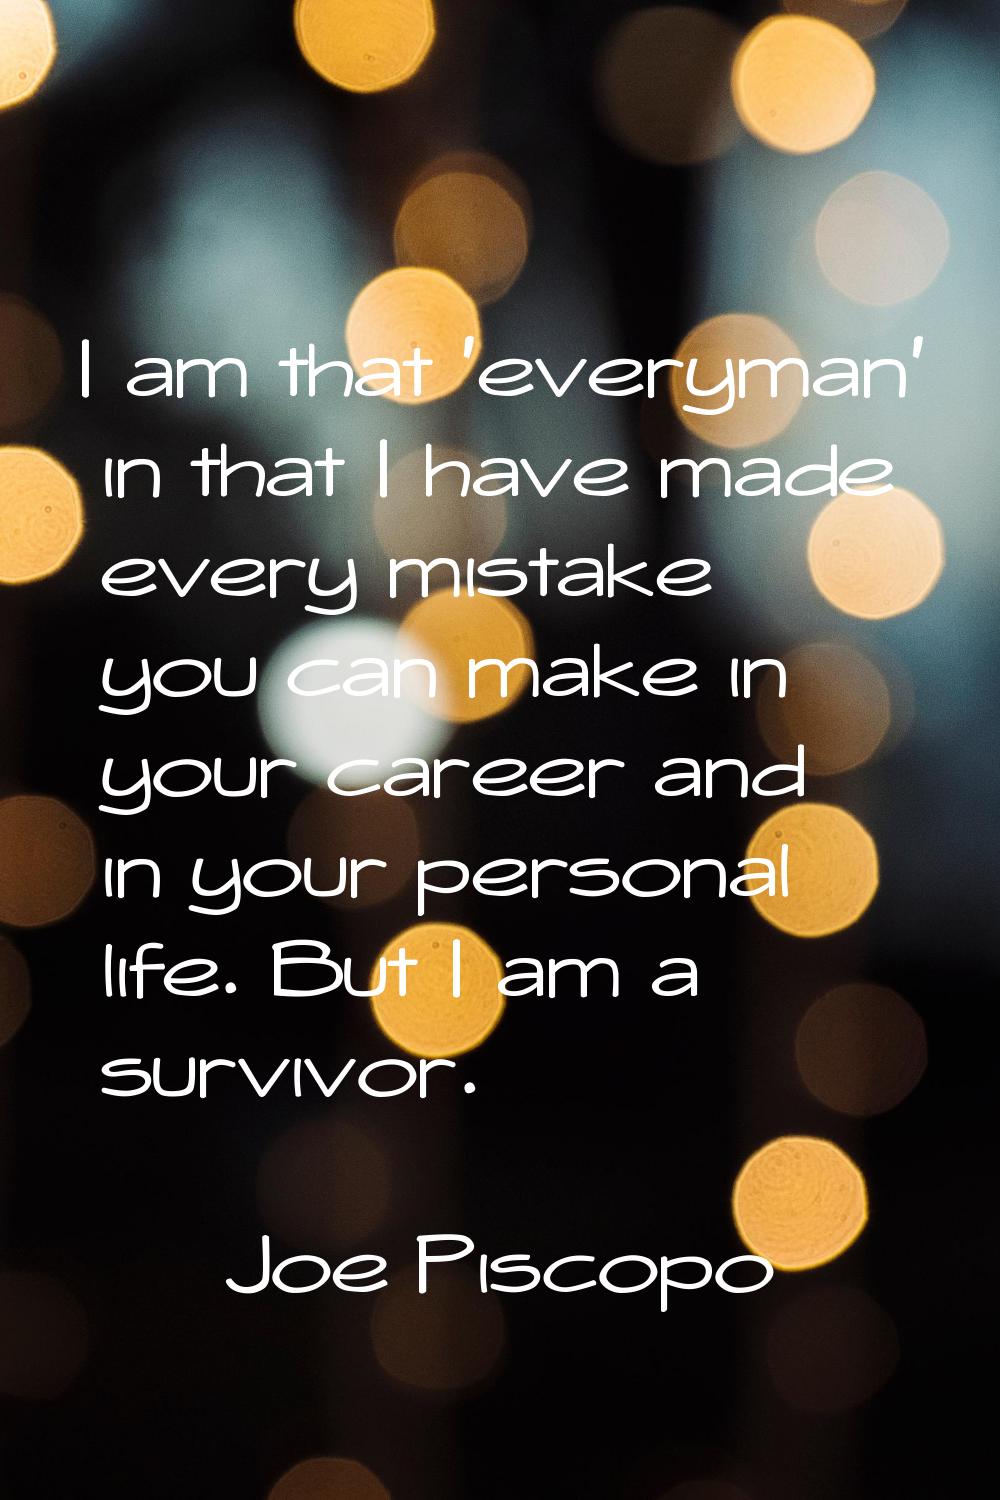 I am that 'everyman' in that I have made every mistake you can make in your career and in your pers